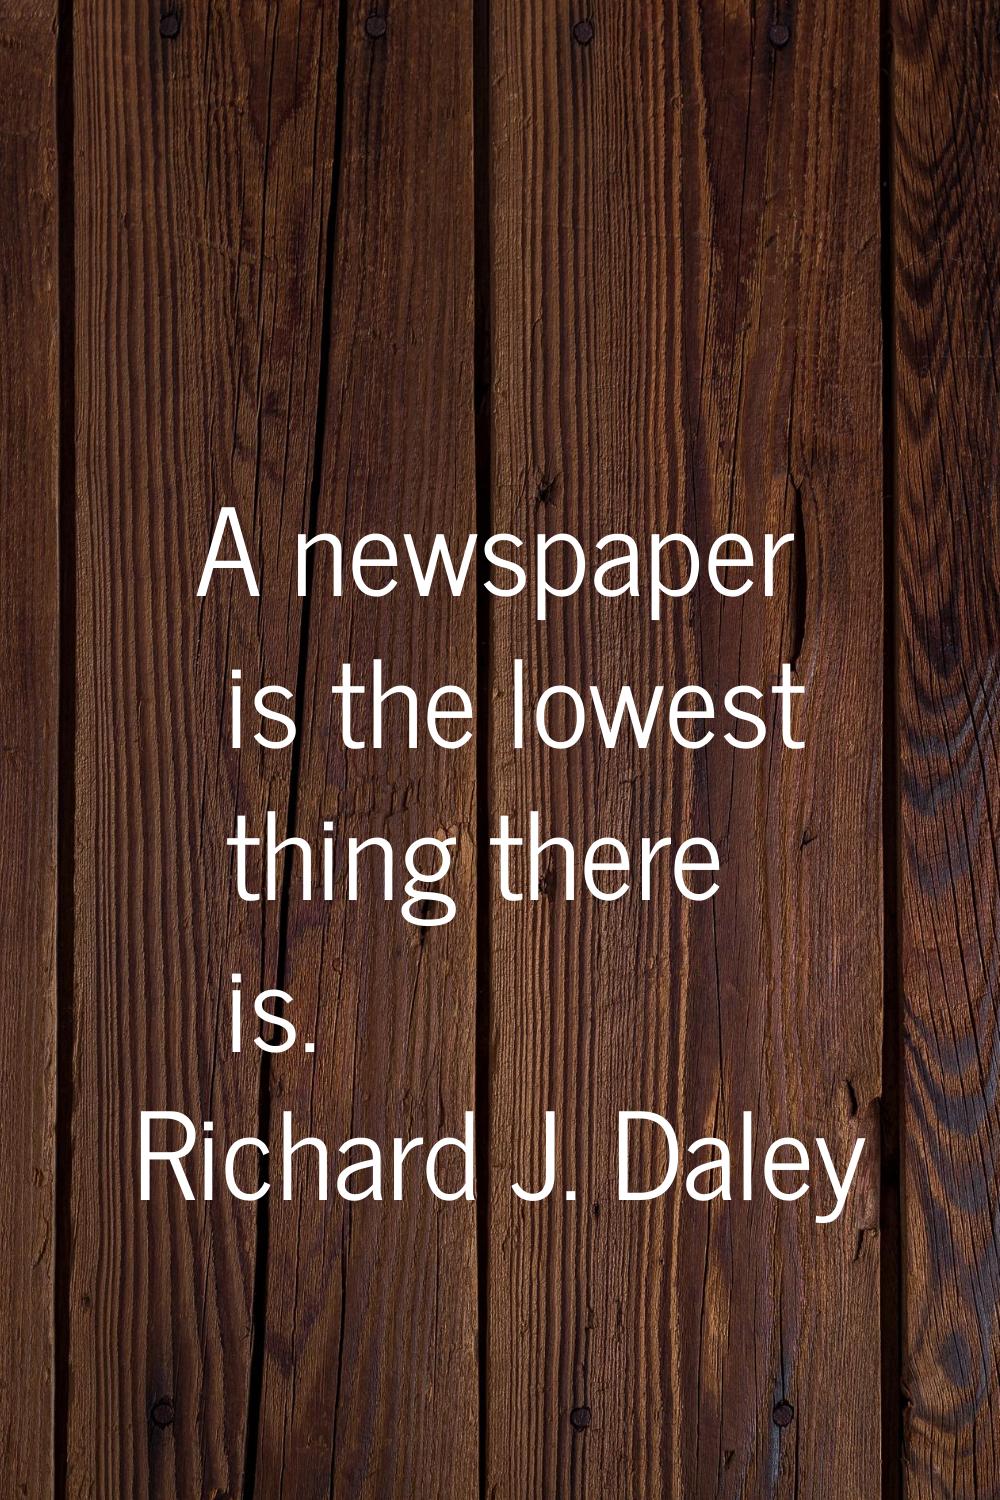 A newspaper is the lowest thing there is.